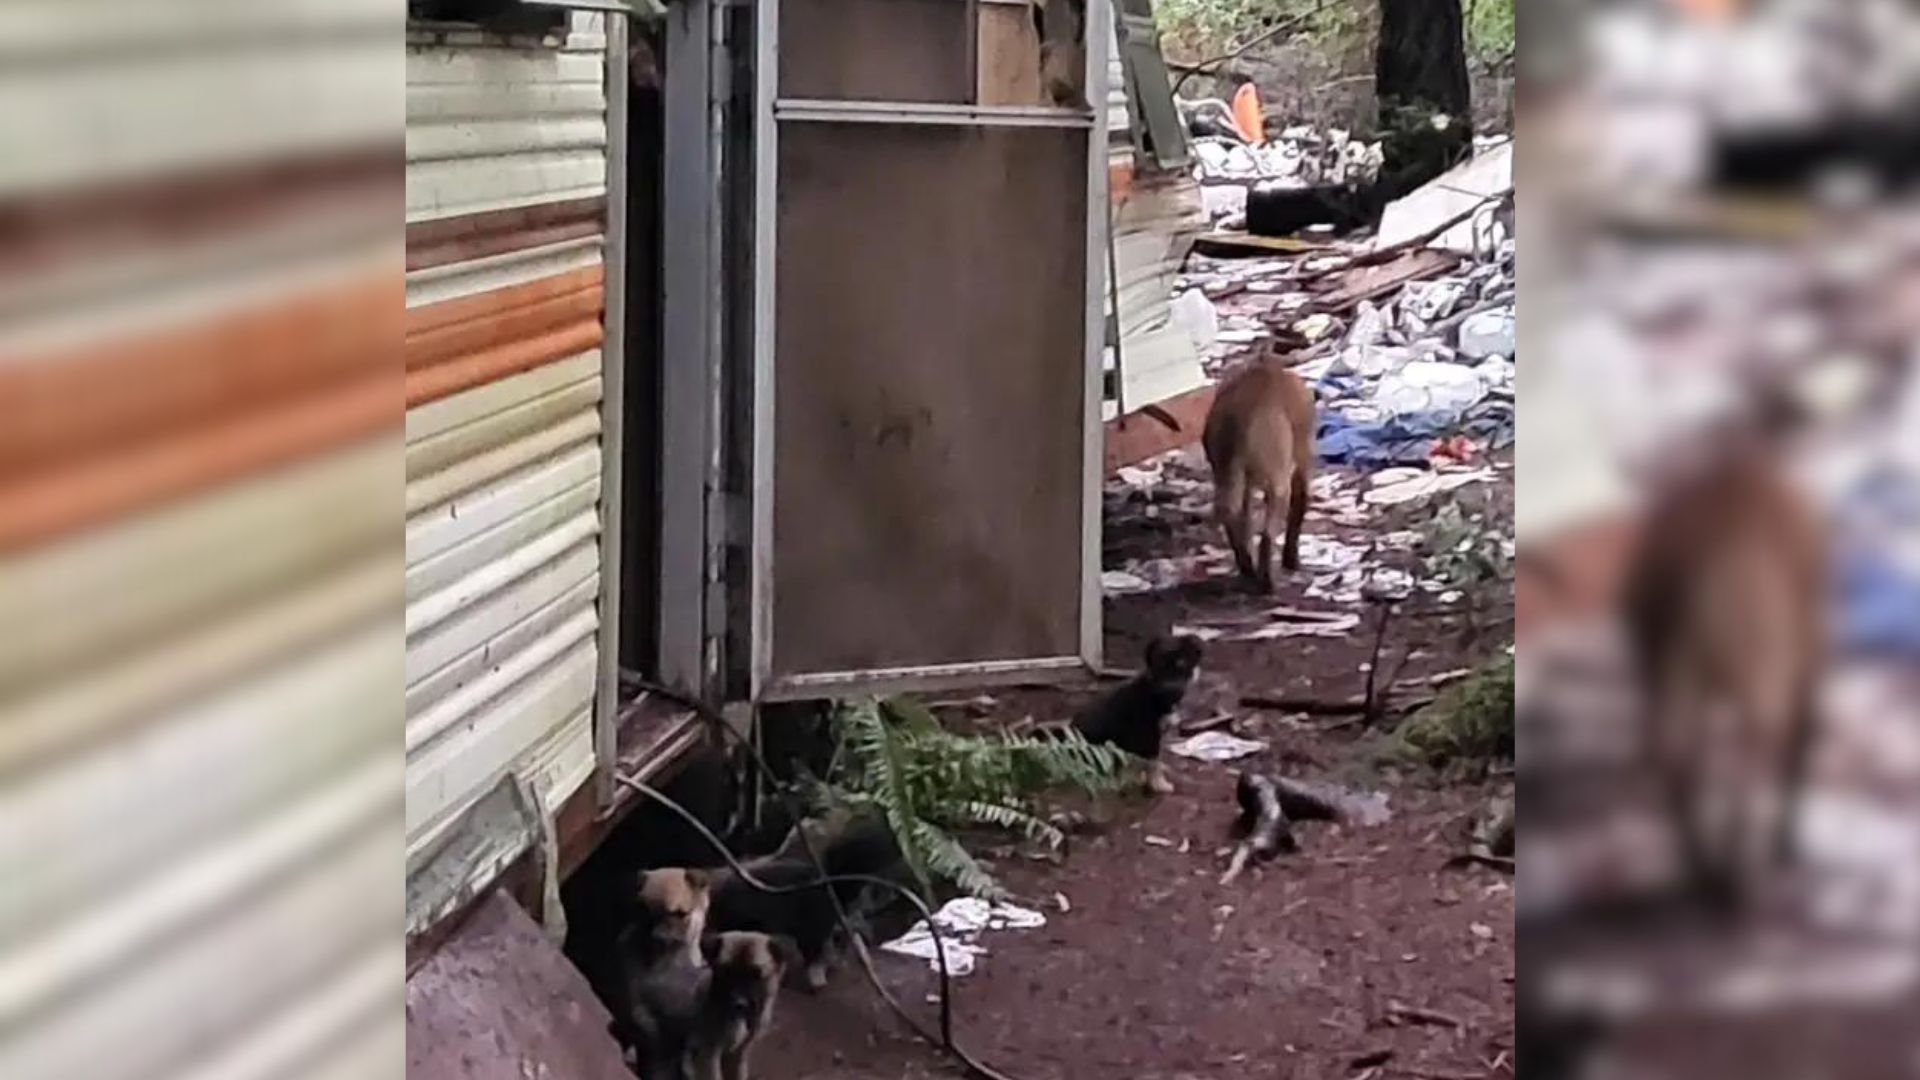 Kids Decided To Follow This Sweet Puppy To An Abandoned Trailer And Couldn’t Believe What They Found There